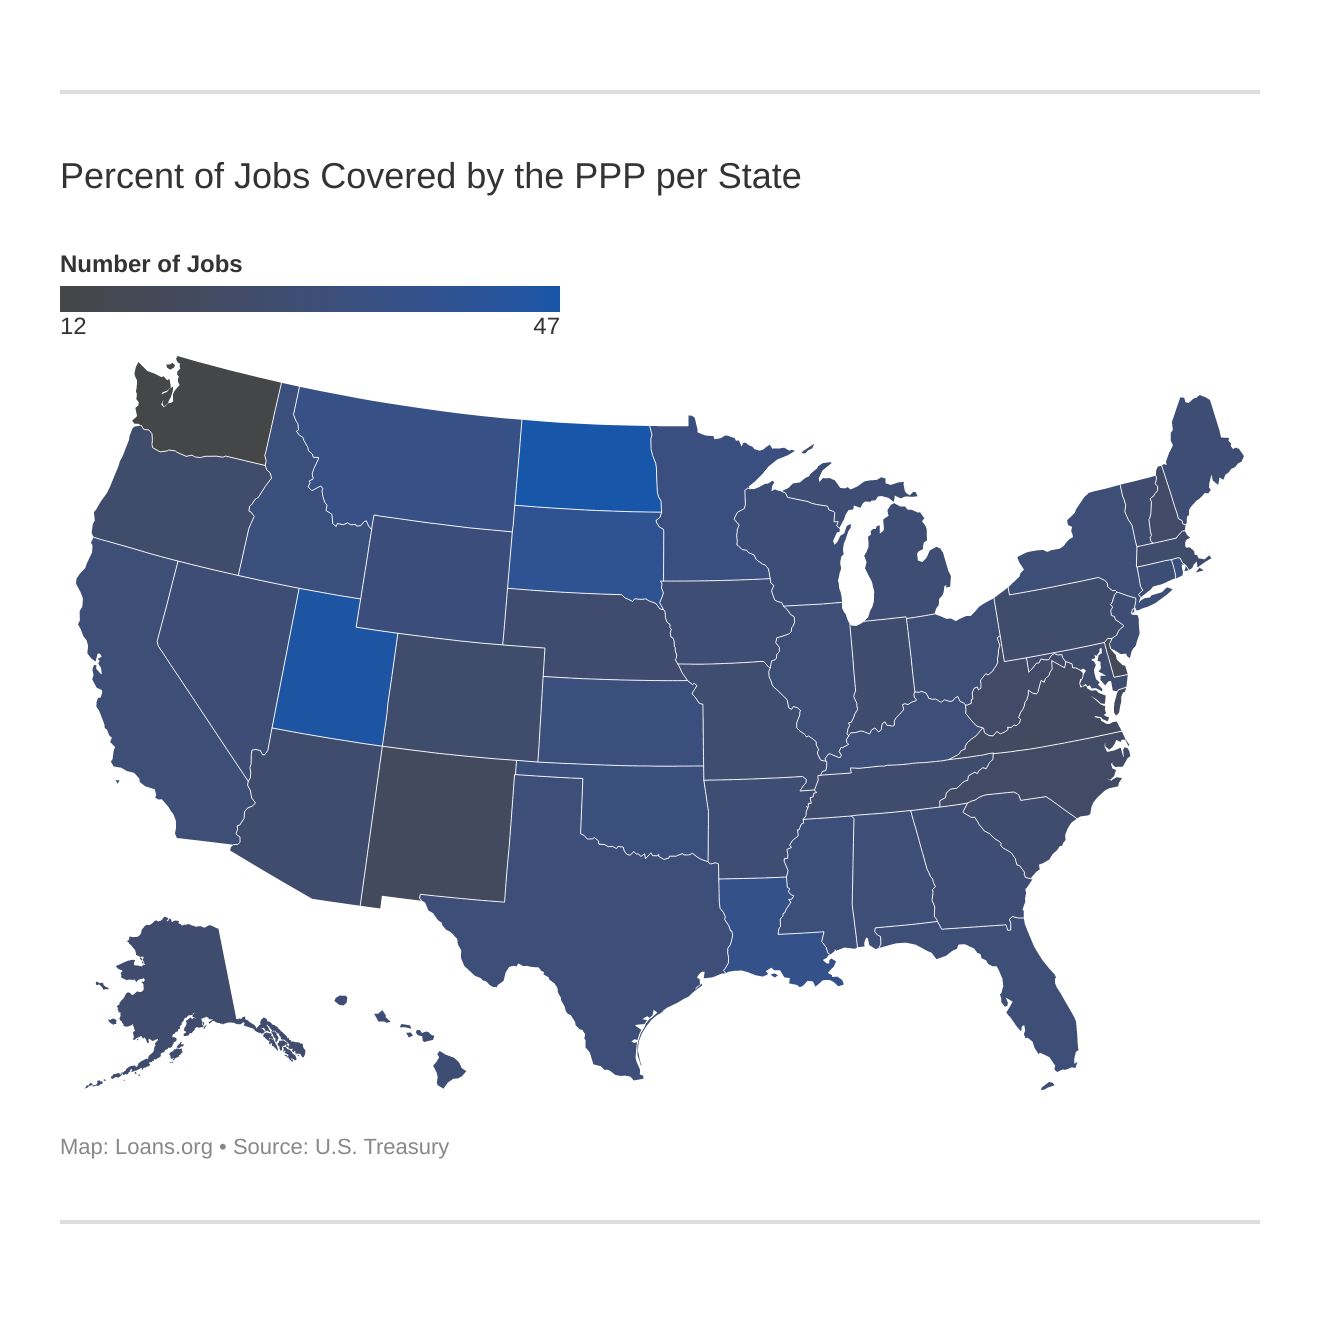 Percent of Jobs Covered by the PPP per State